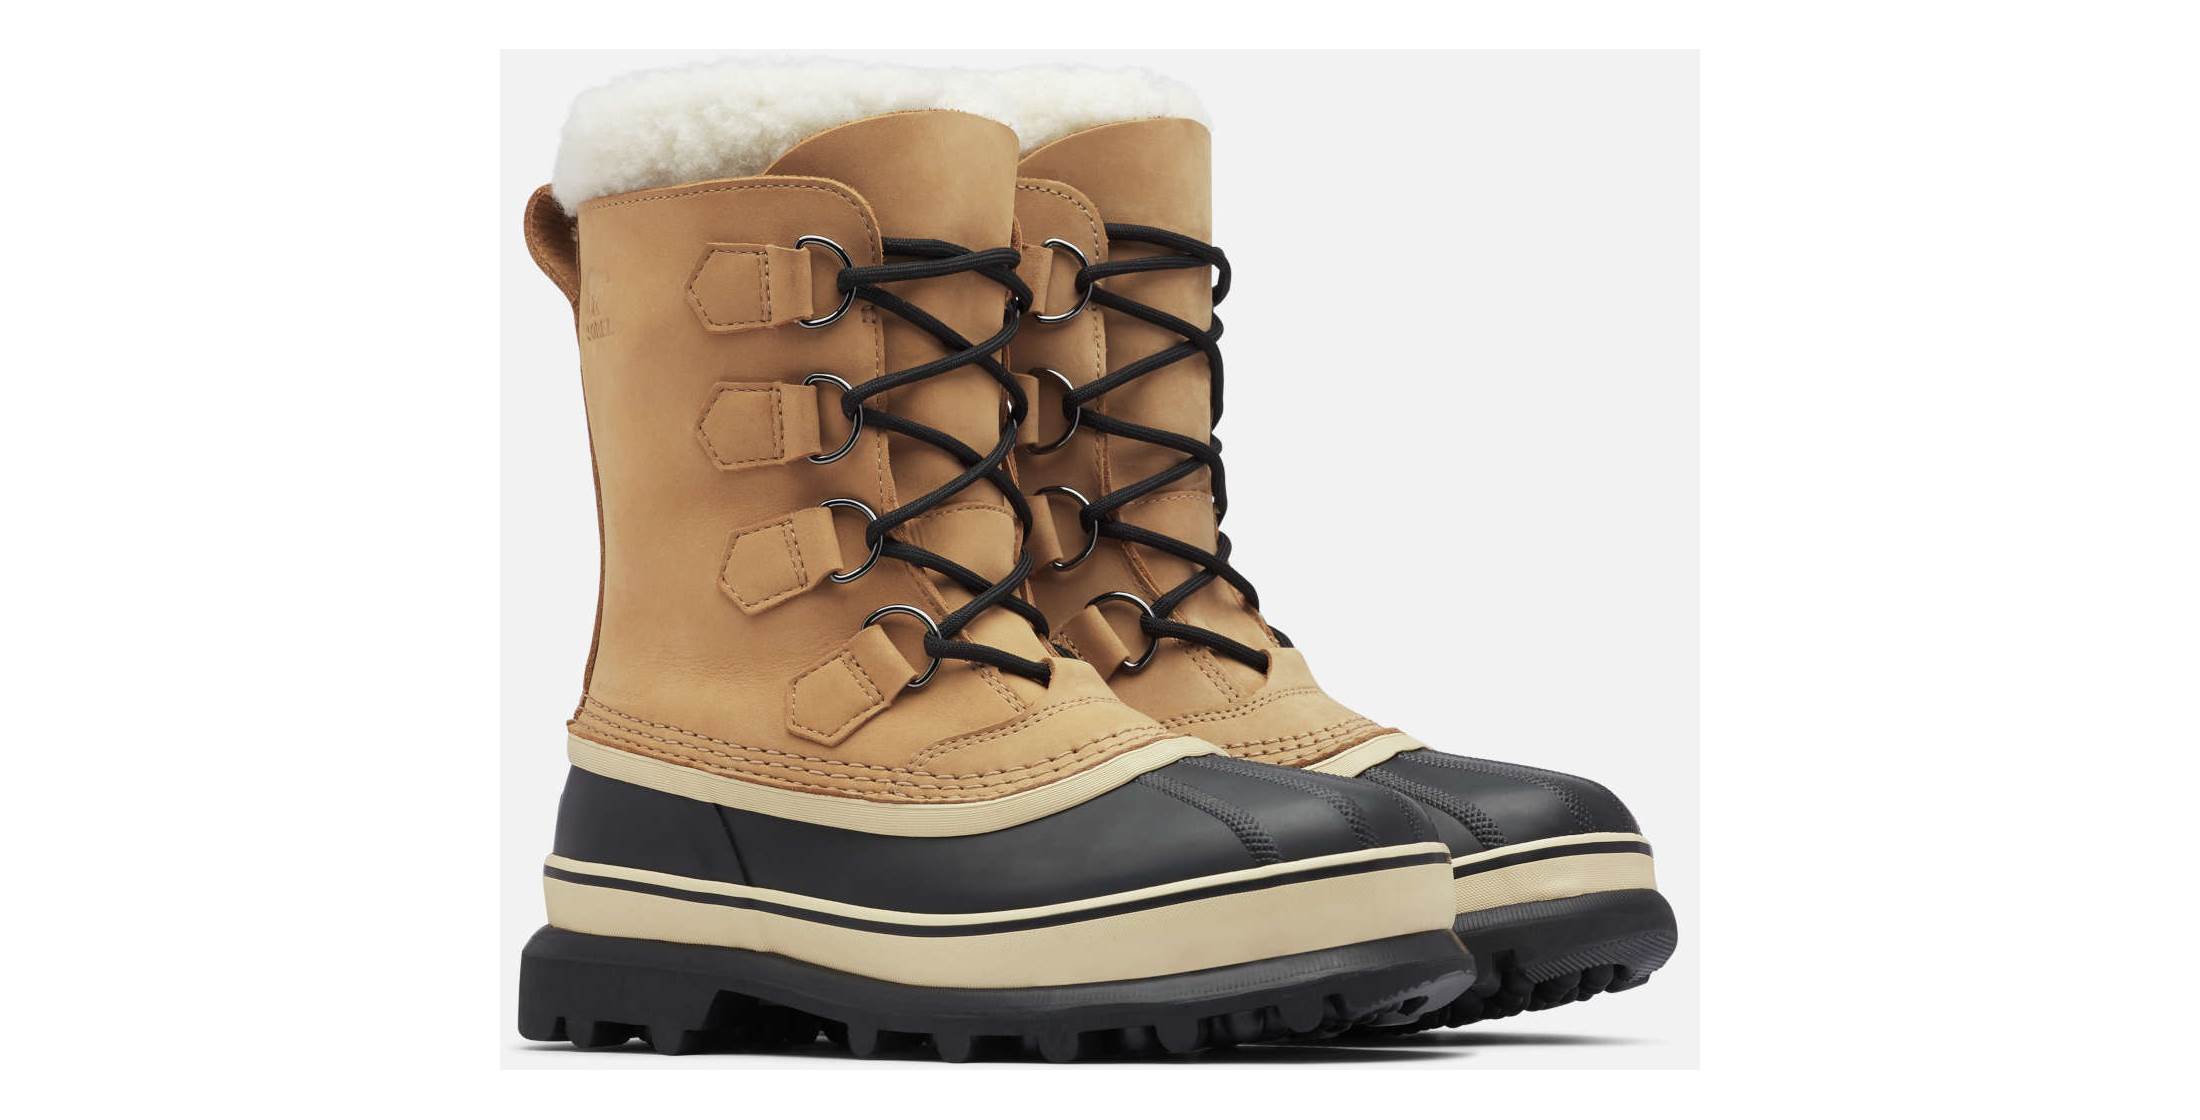 Sorel Caribou Womens Leather Waterproof Boots OutdoorGB